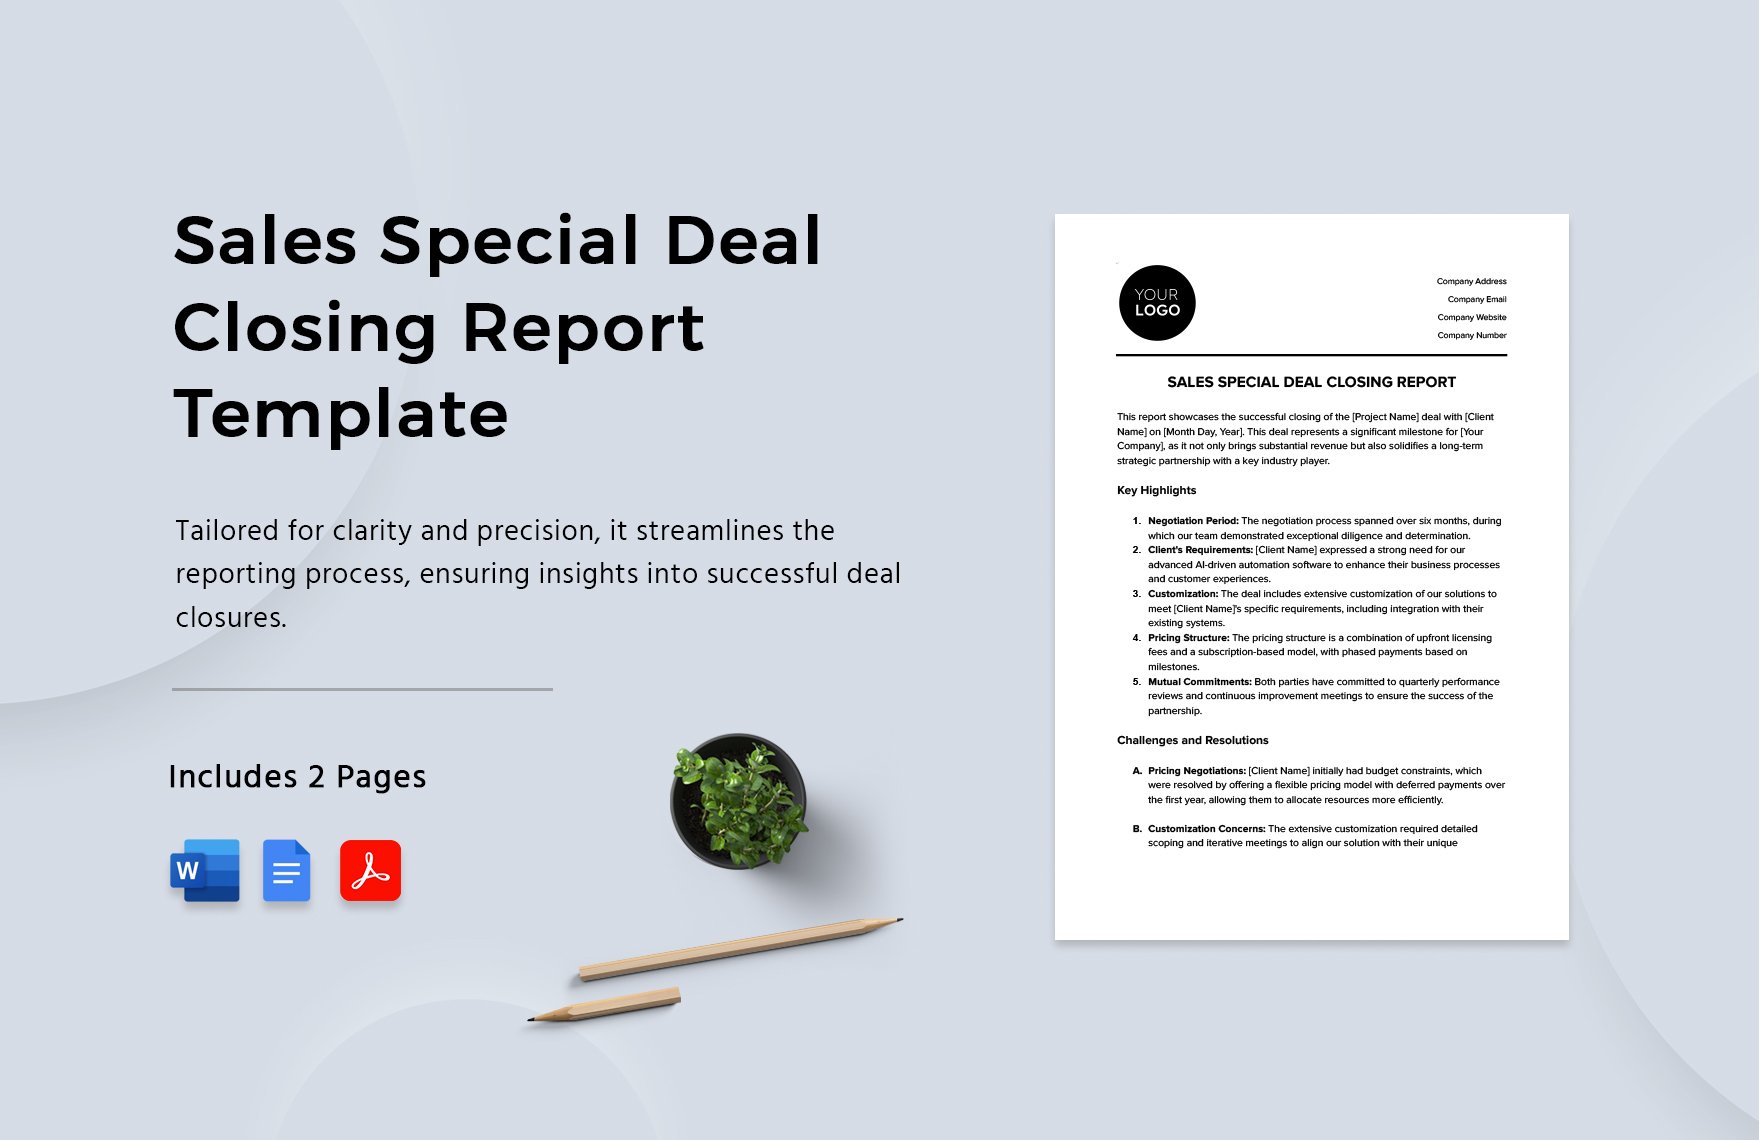 Sales Special Deal Closing Report Template